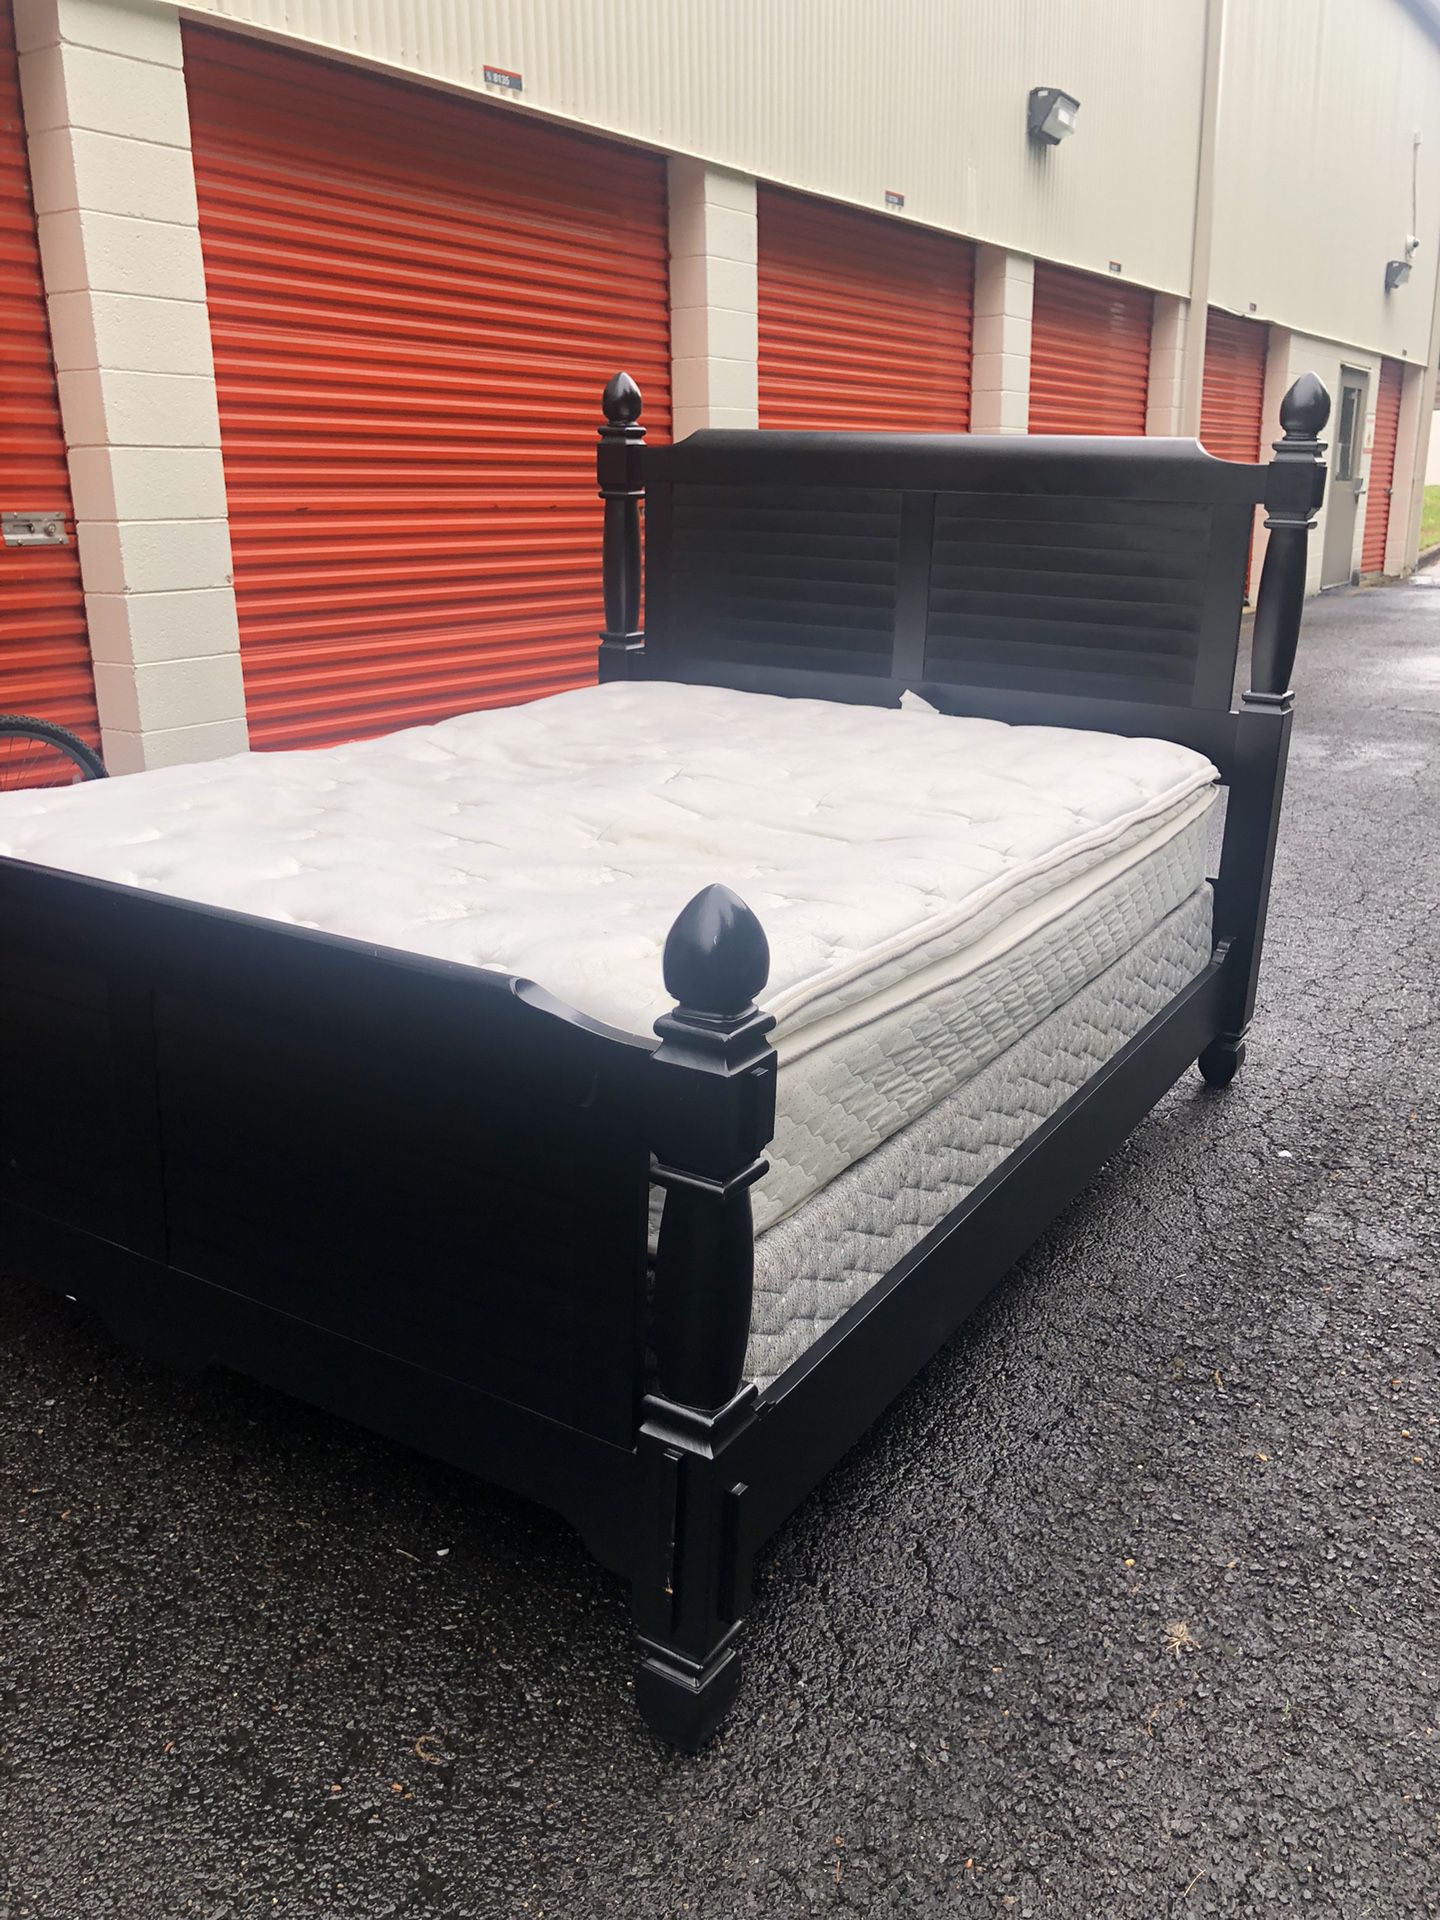 Quality Black Solid Wood Queen Size Bed Headbord, Footboard, Rails, Mattress And Boxspring Great Condition